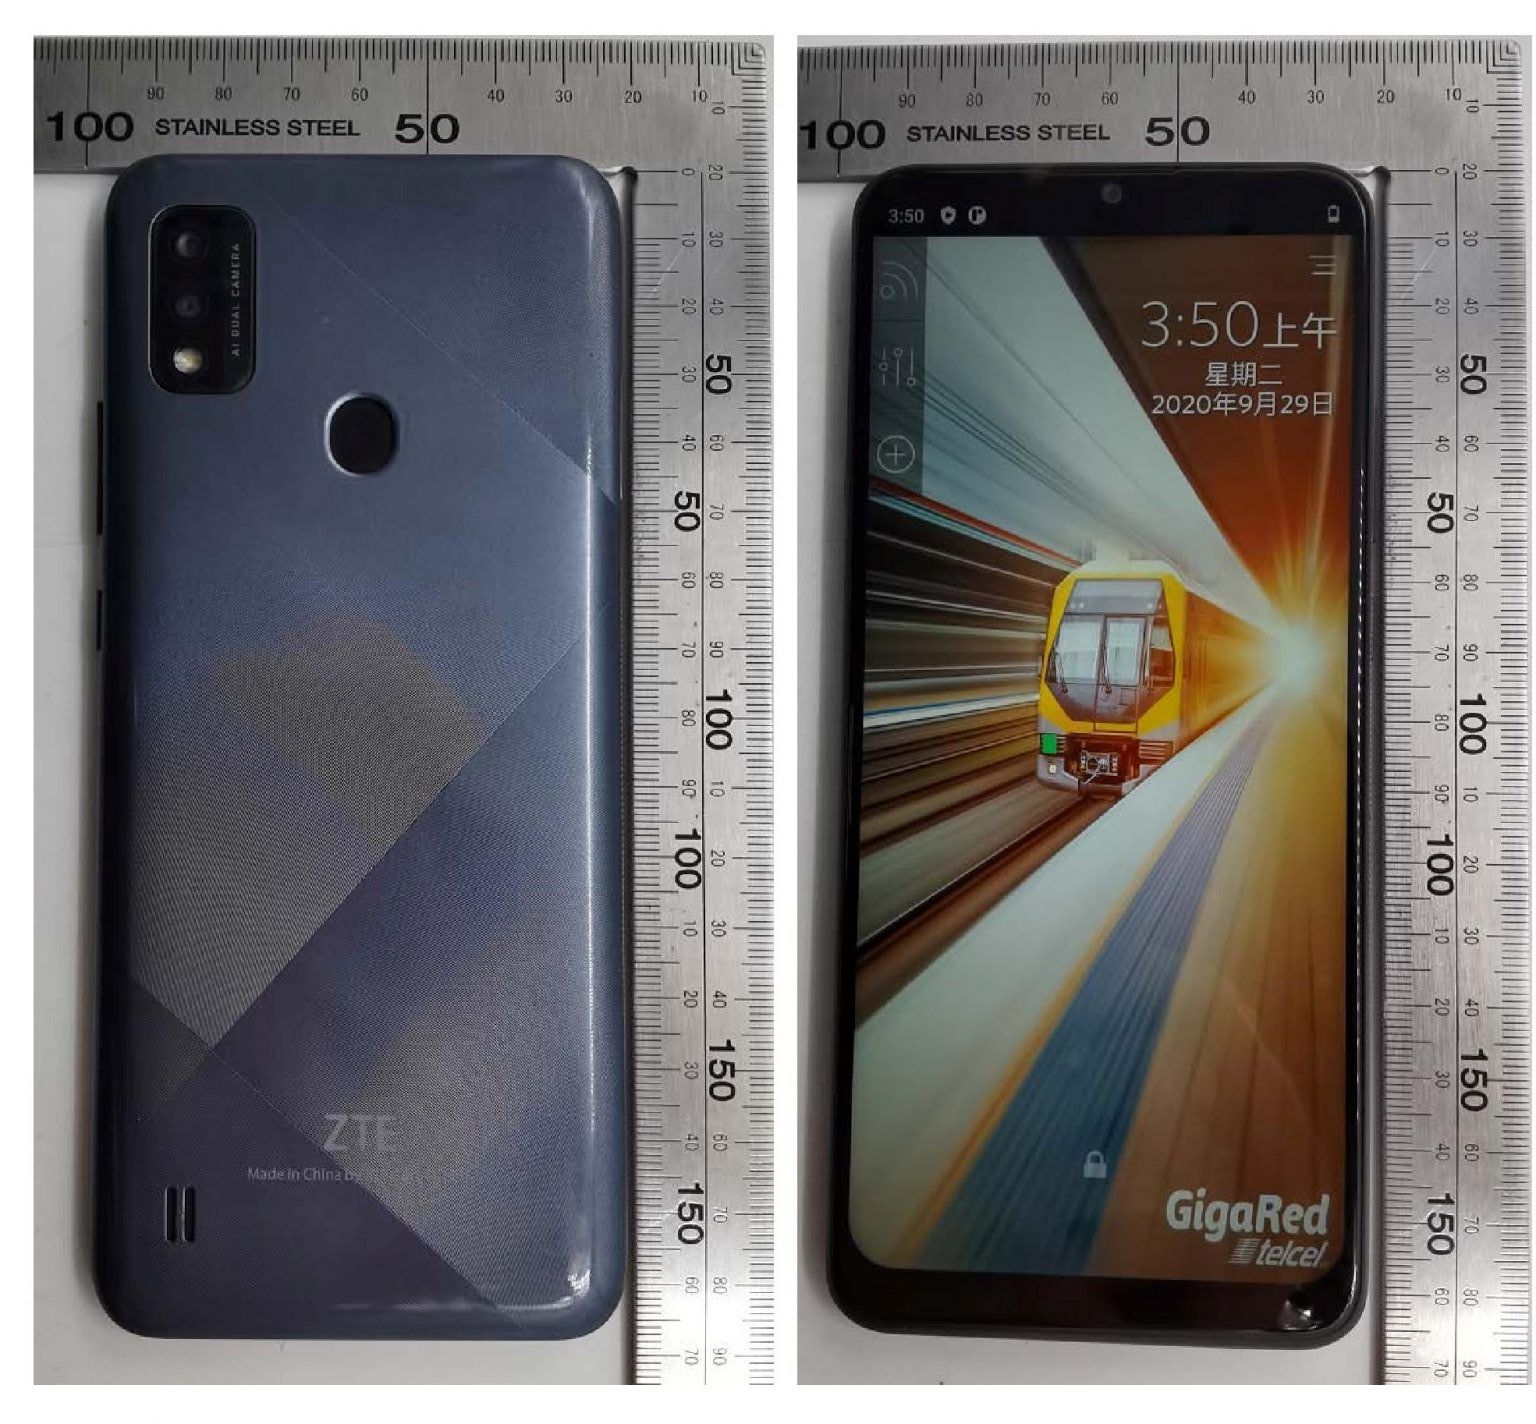 ZTE to announce 'something big' tomorrow, might be a new smartphone